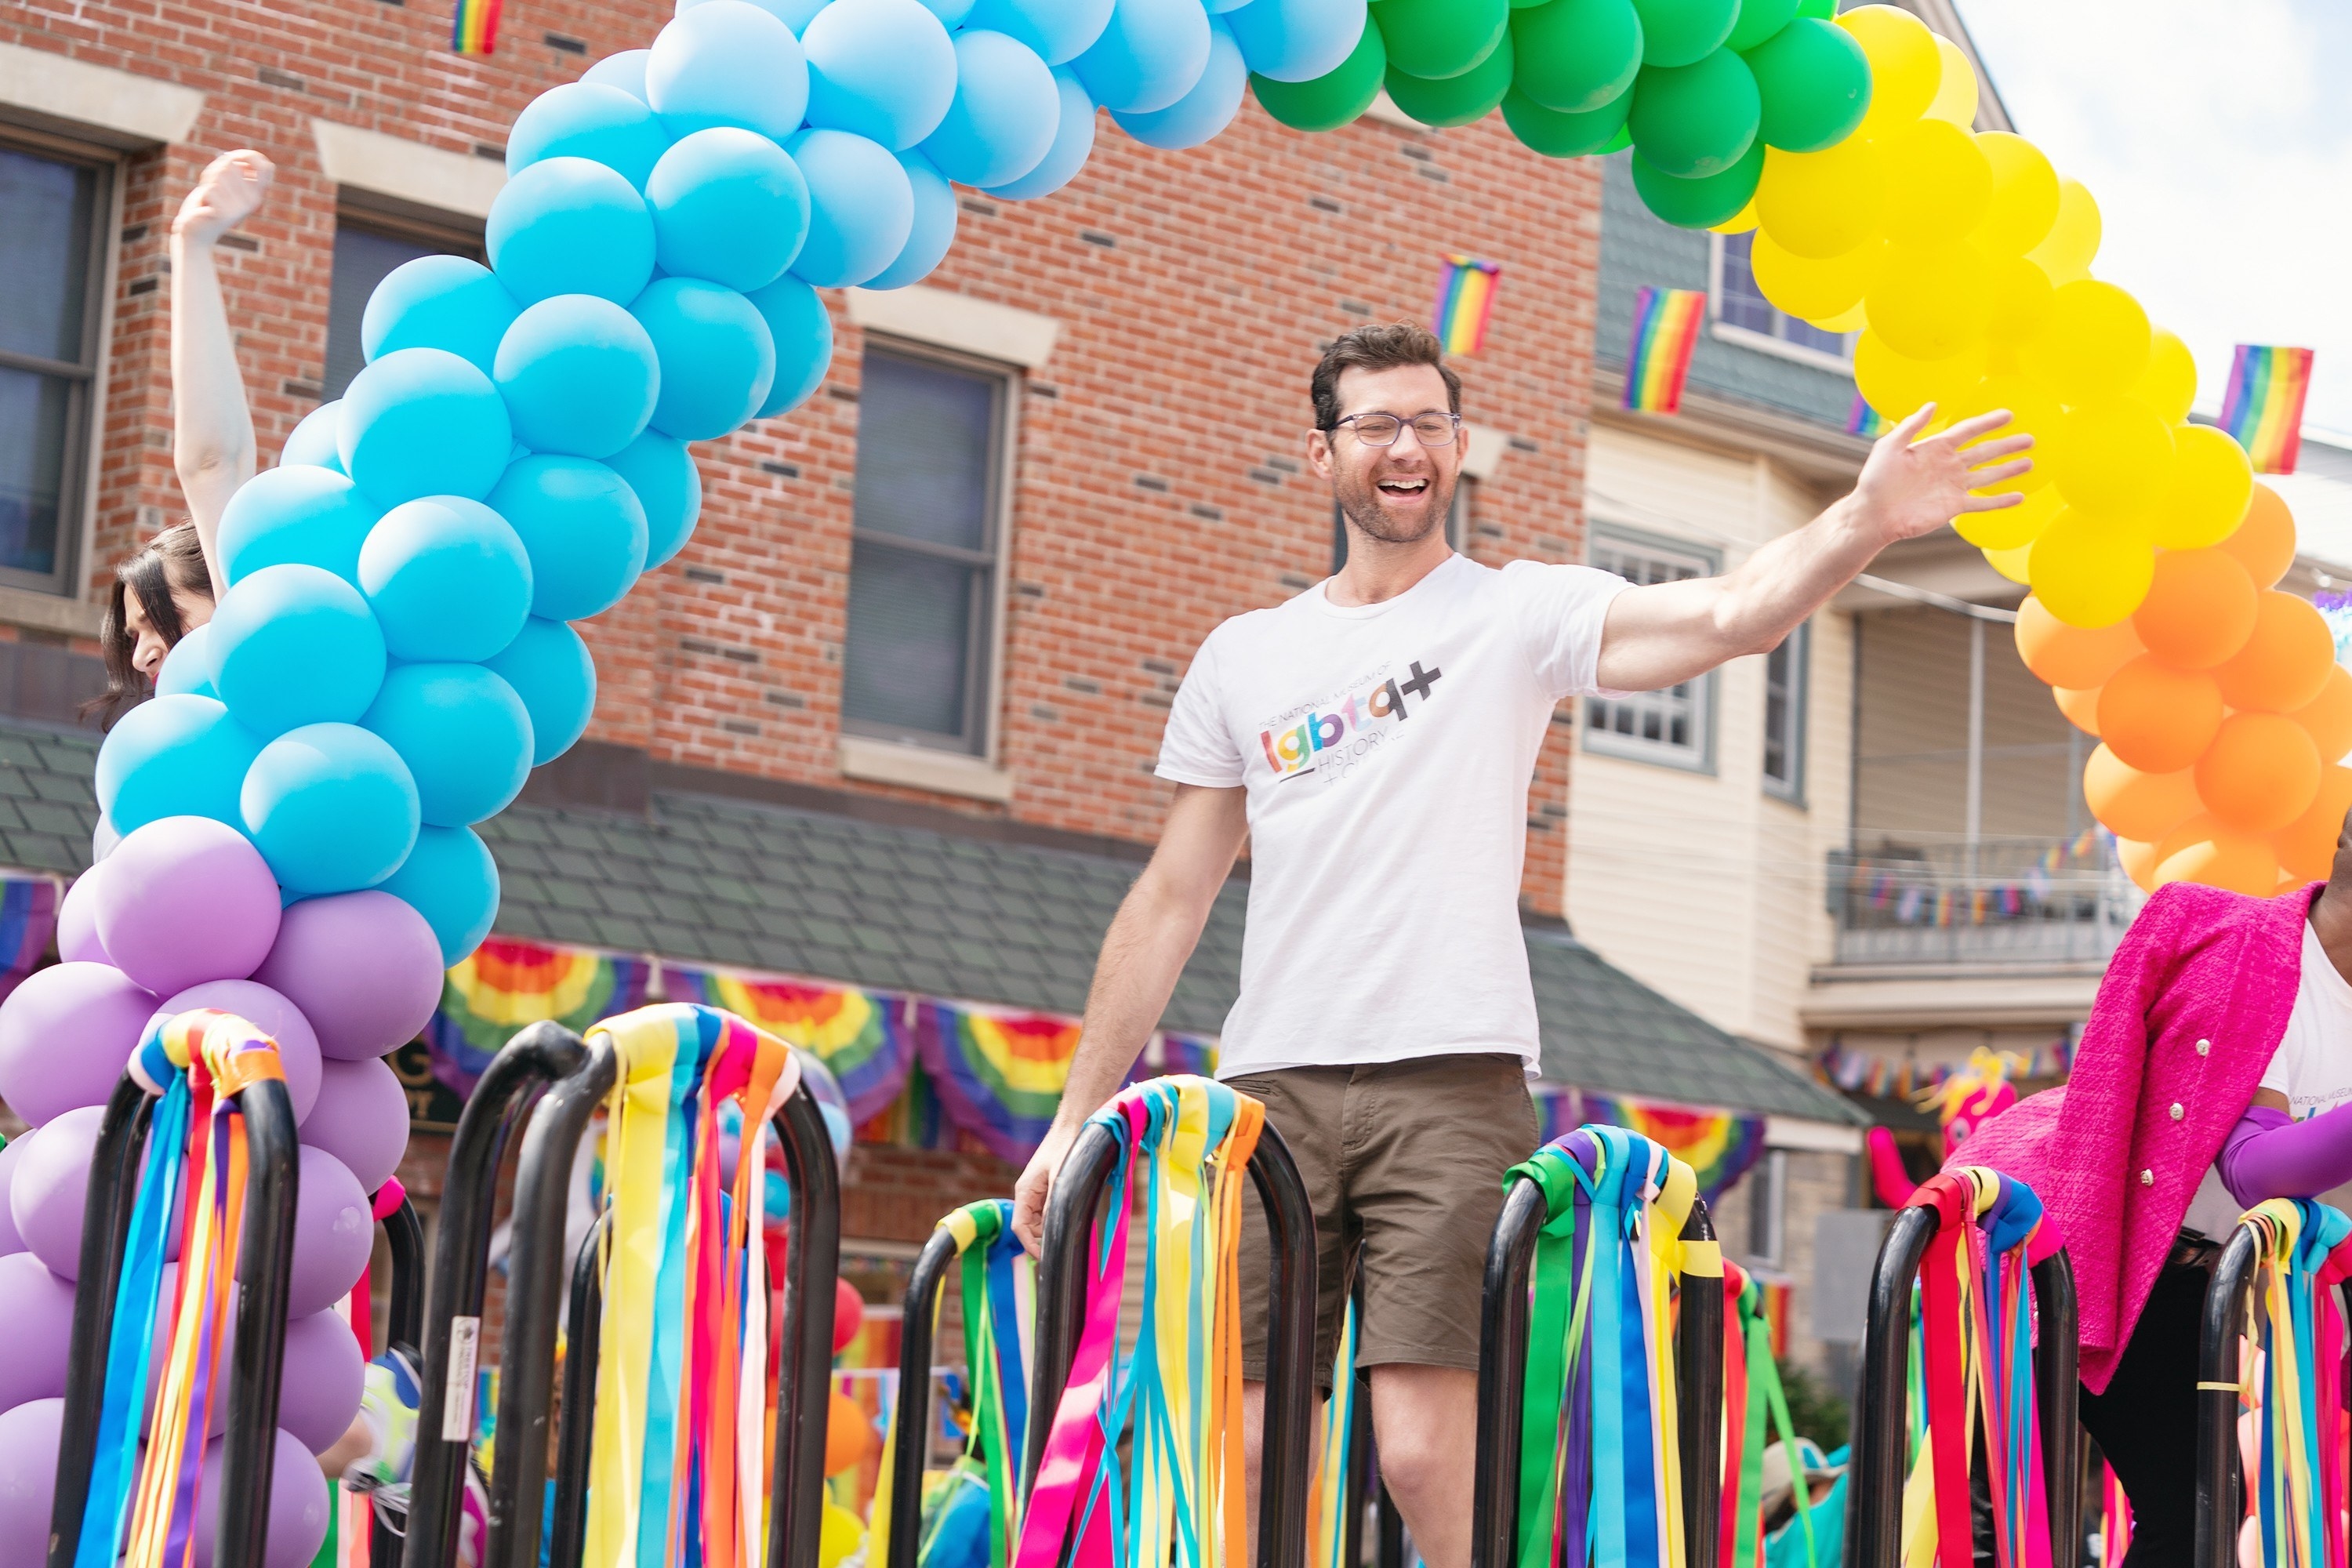 Billy stands on a Pride float in the movie